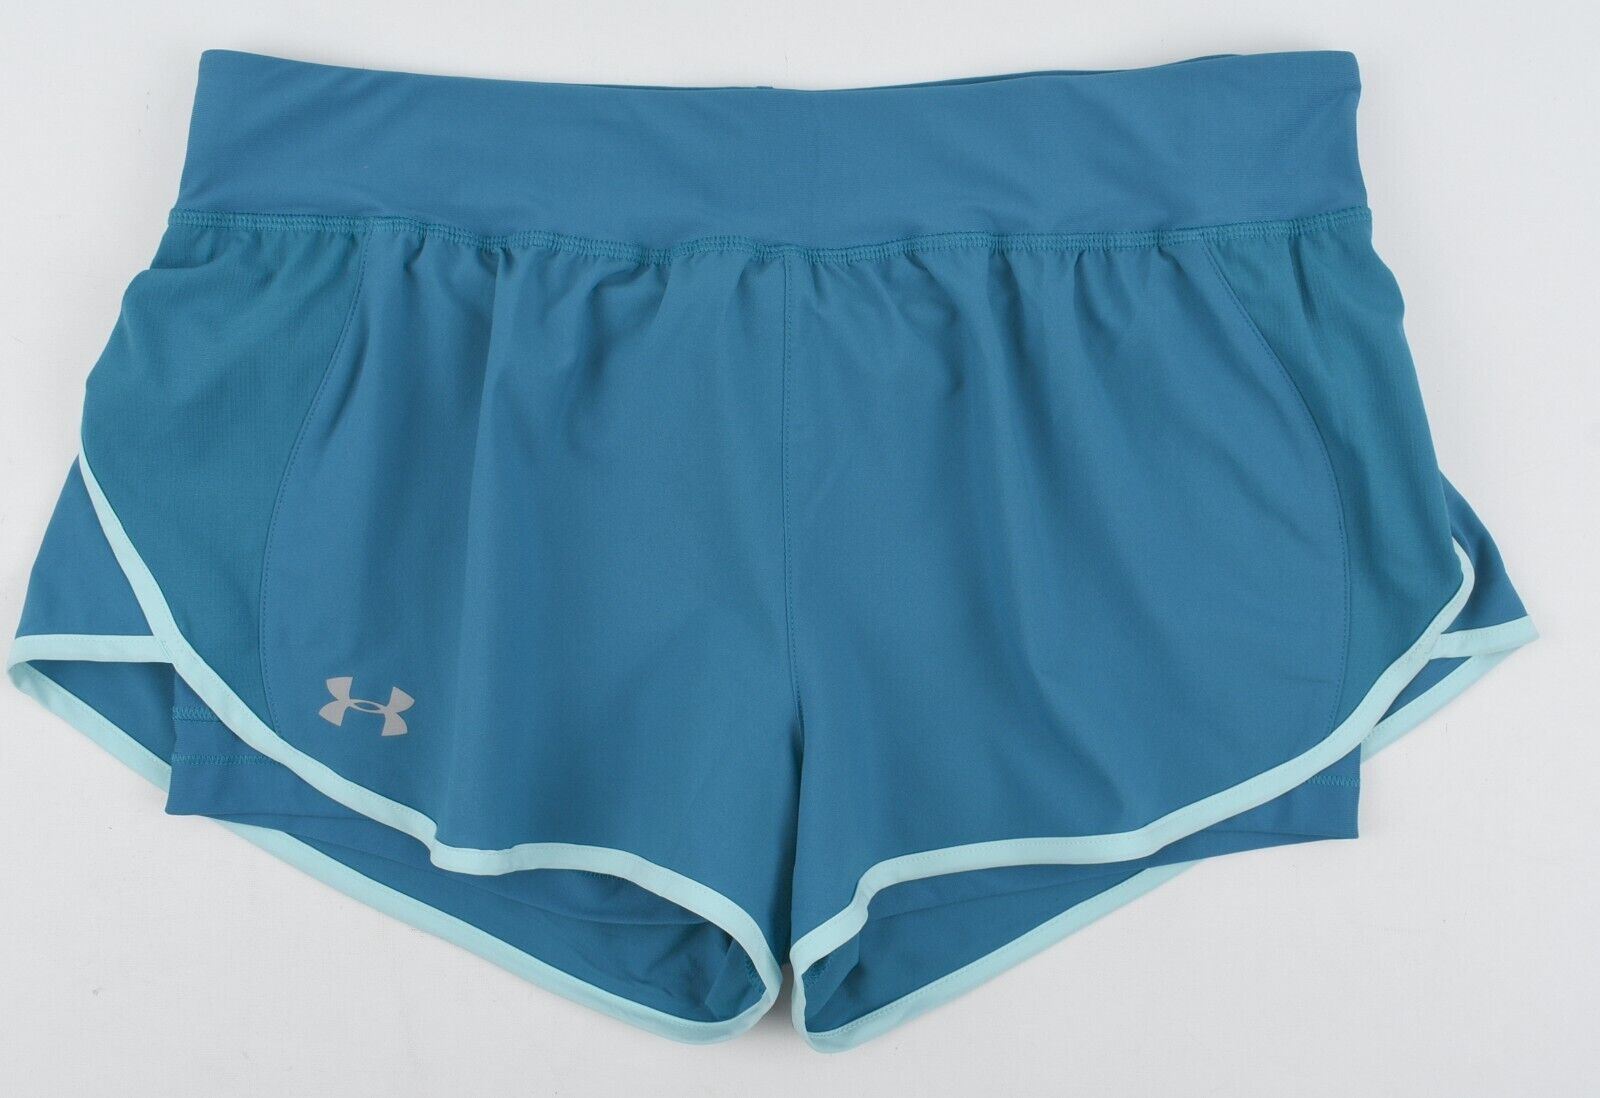 UNDER ARMOUR Womens Activewear Gym Running Shorts, Teal Blue, size XL /UK 16